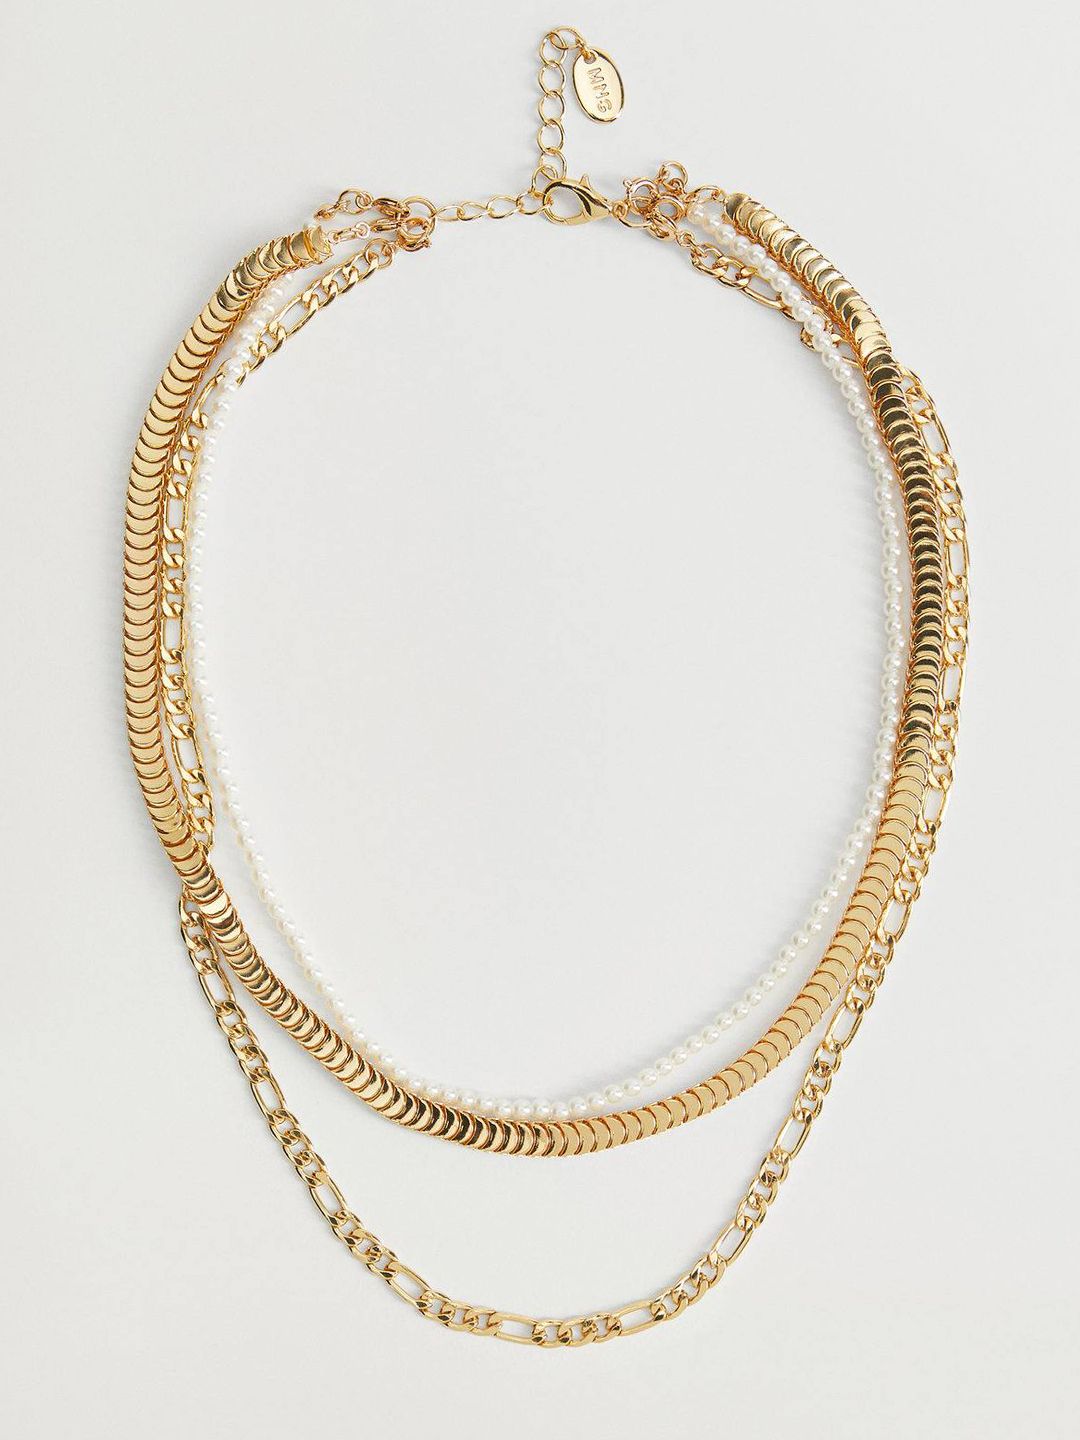 MANGO Gold-Toned & White Beaded Layered Link Necklace Price in India